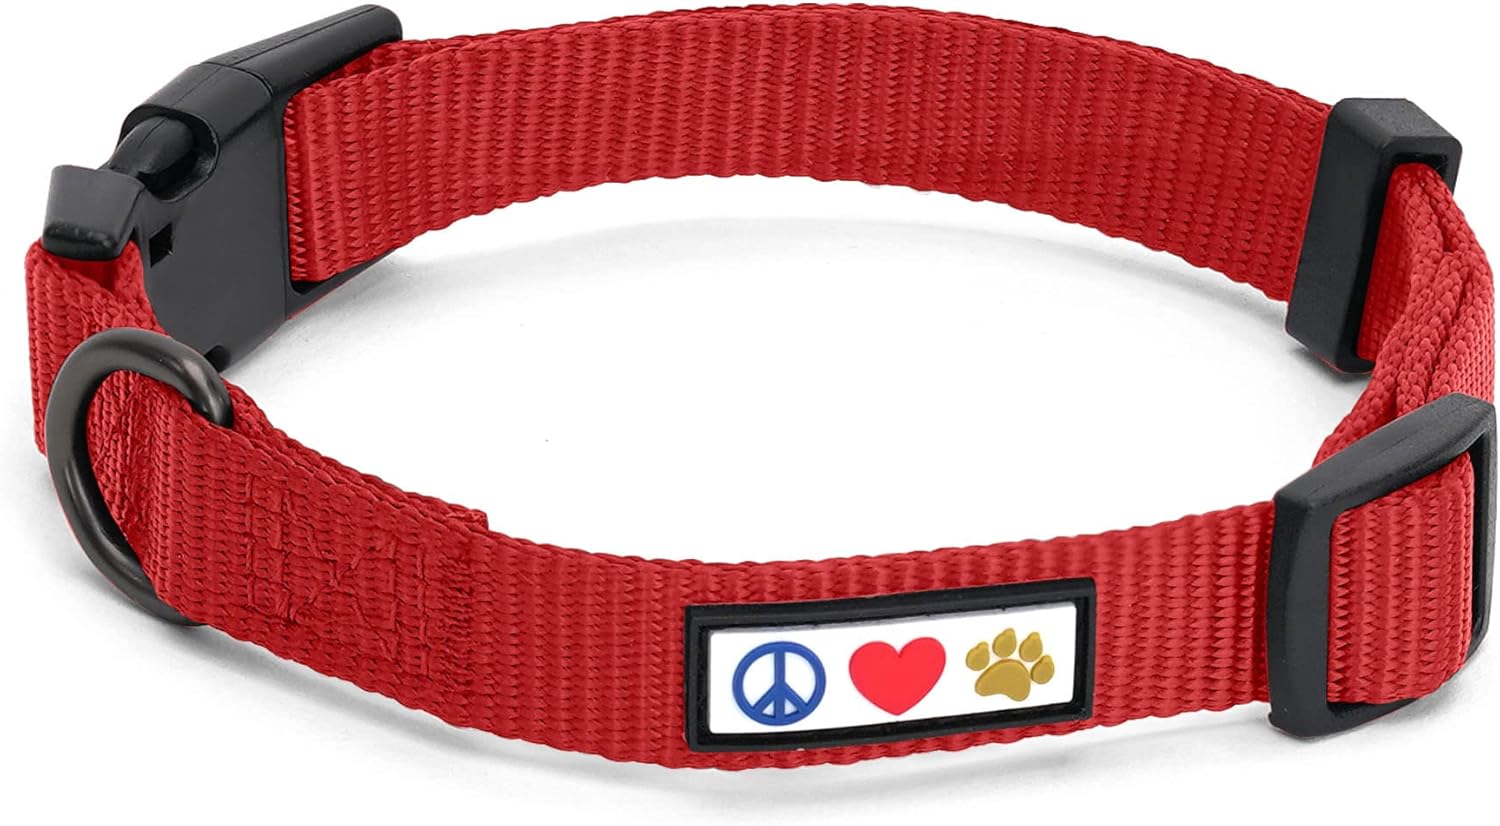 Pawtitas Dog Collar For Extra Small Dogs Training Puppy Collar With Solid - XS - Red